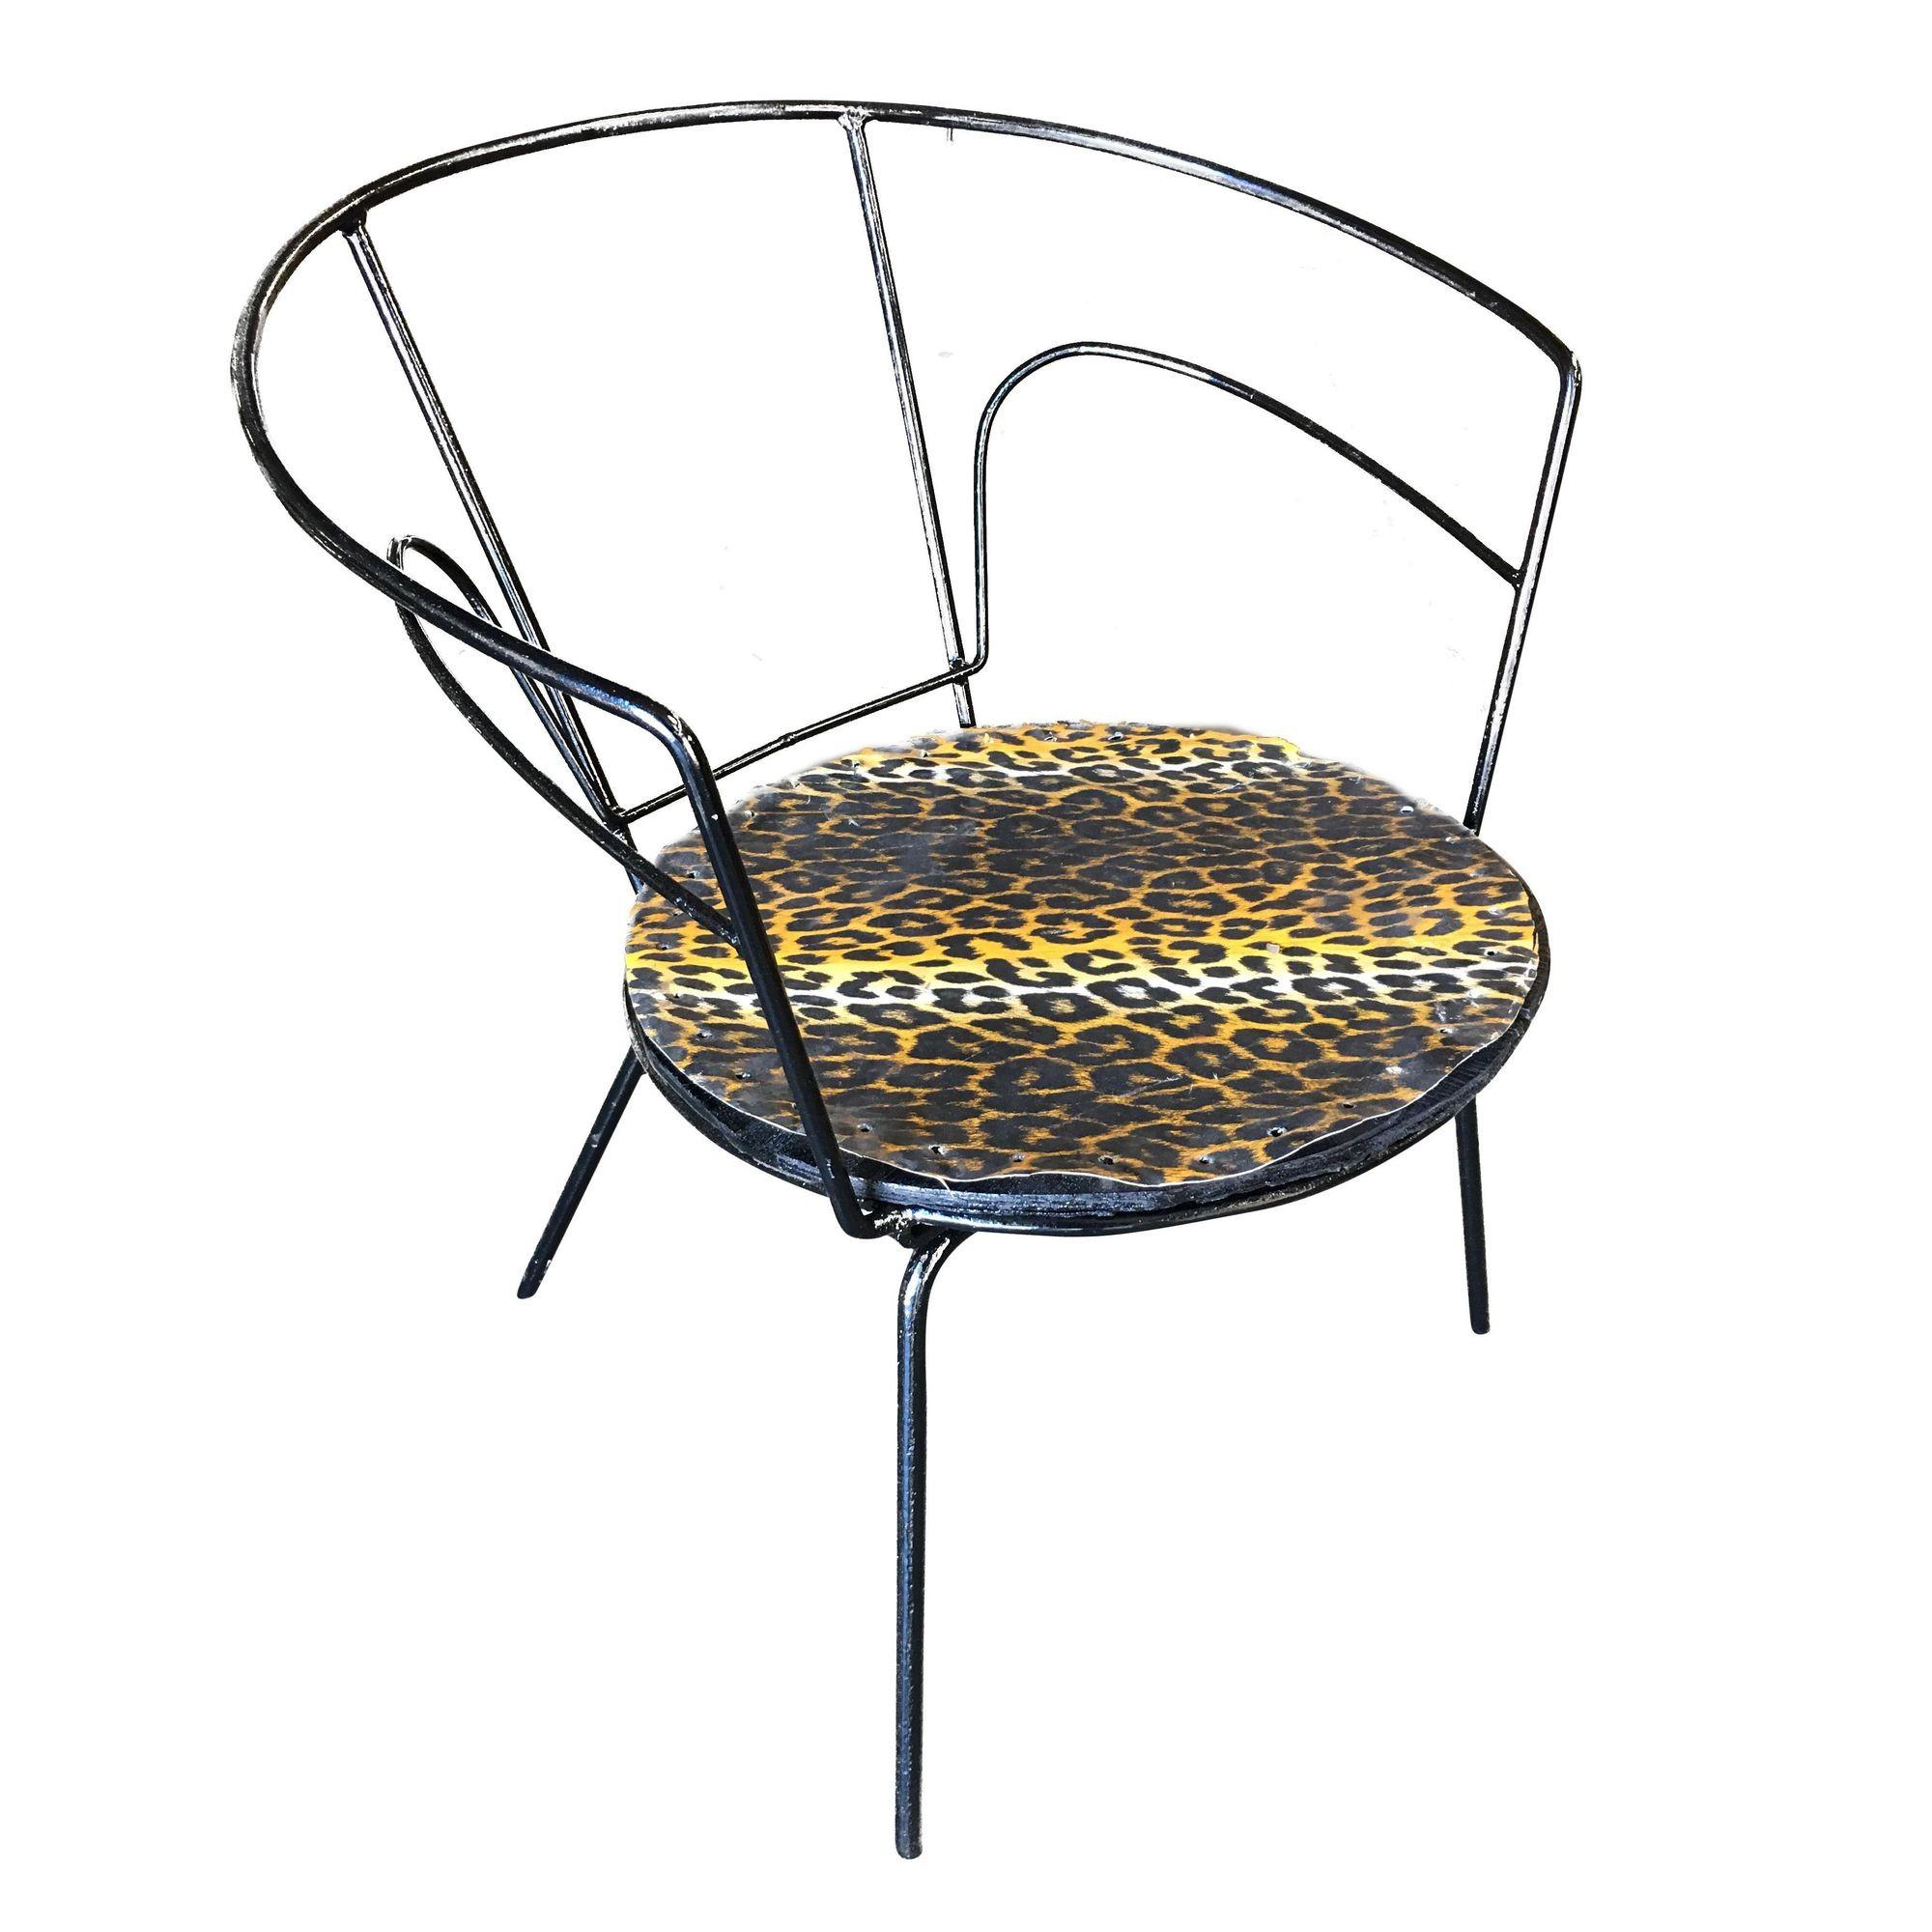 Pair of modernist Mid Century era iron wire armchairs with leopard print seat.

Circa 1950